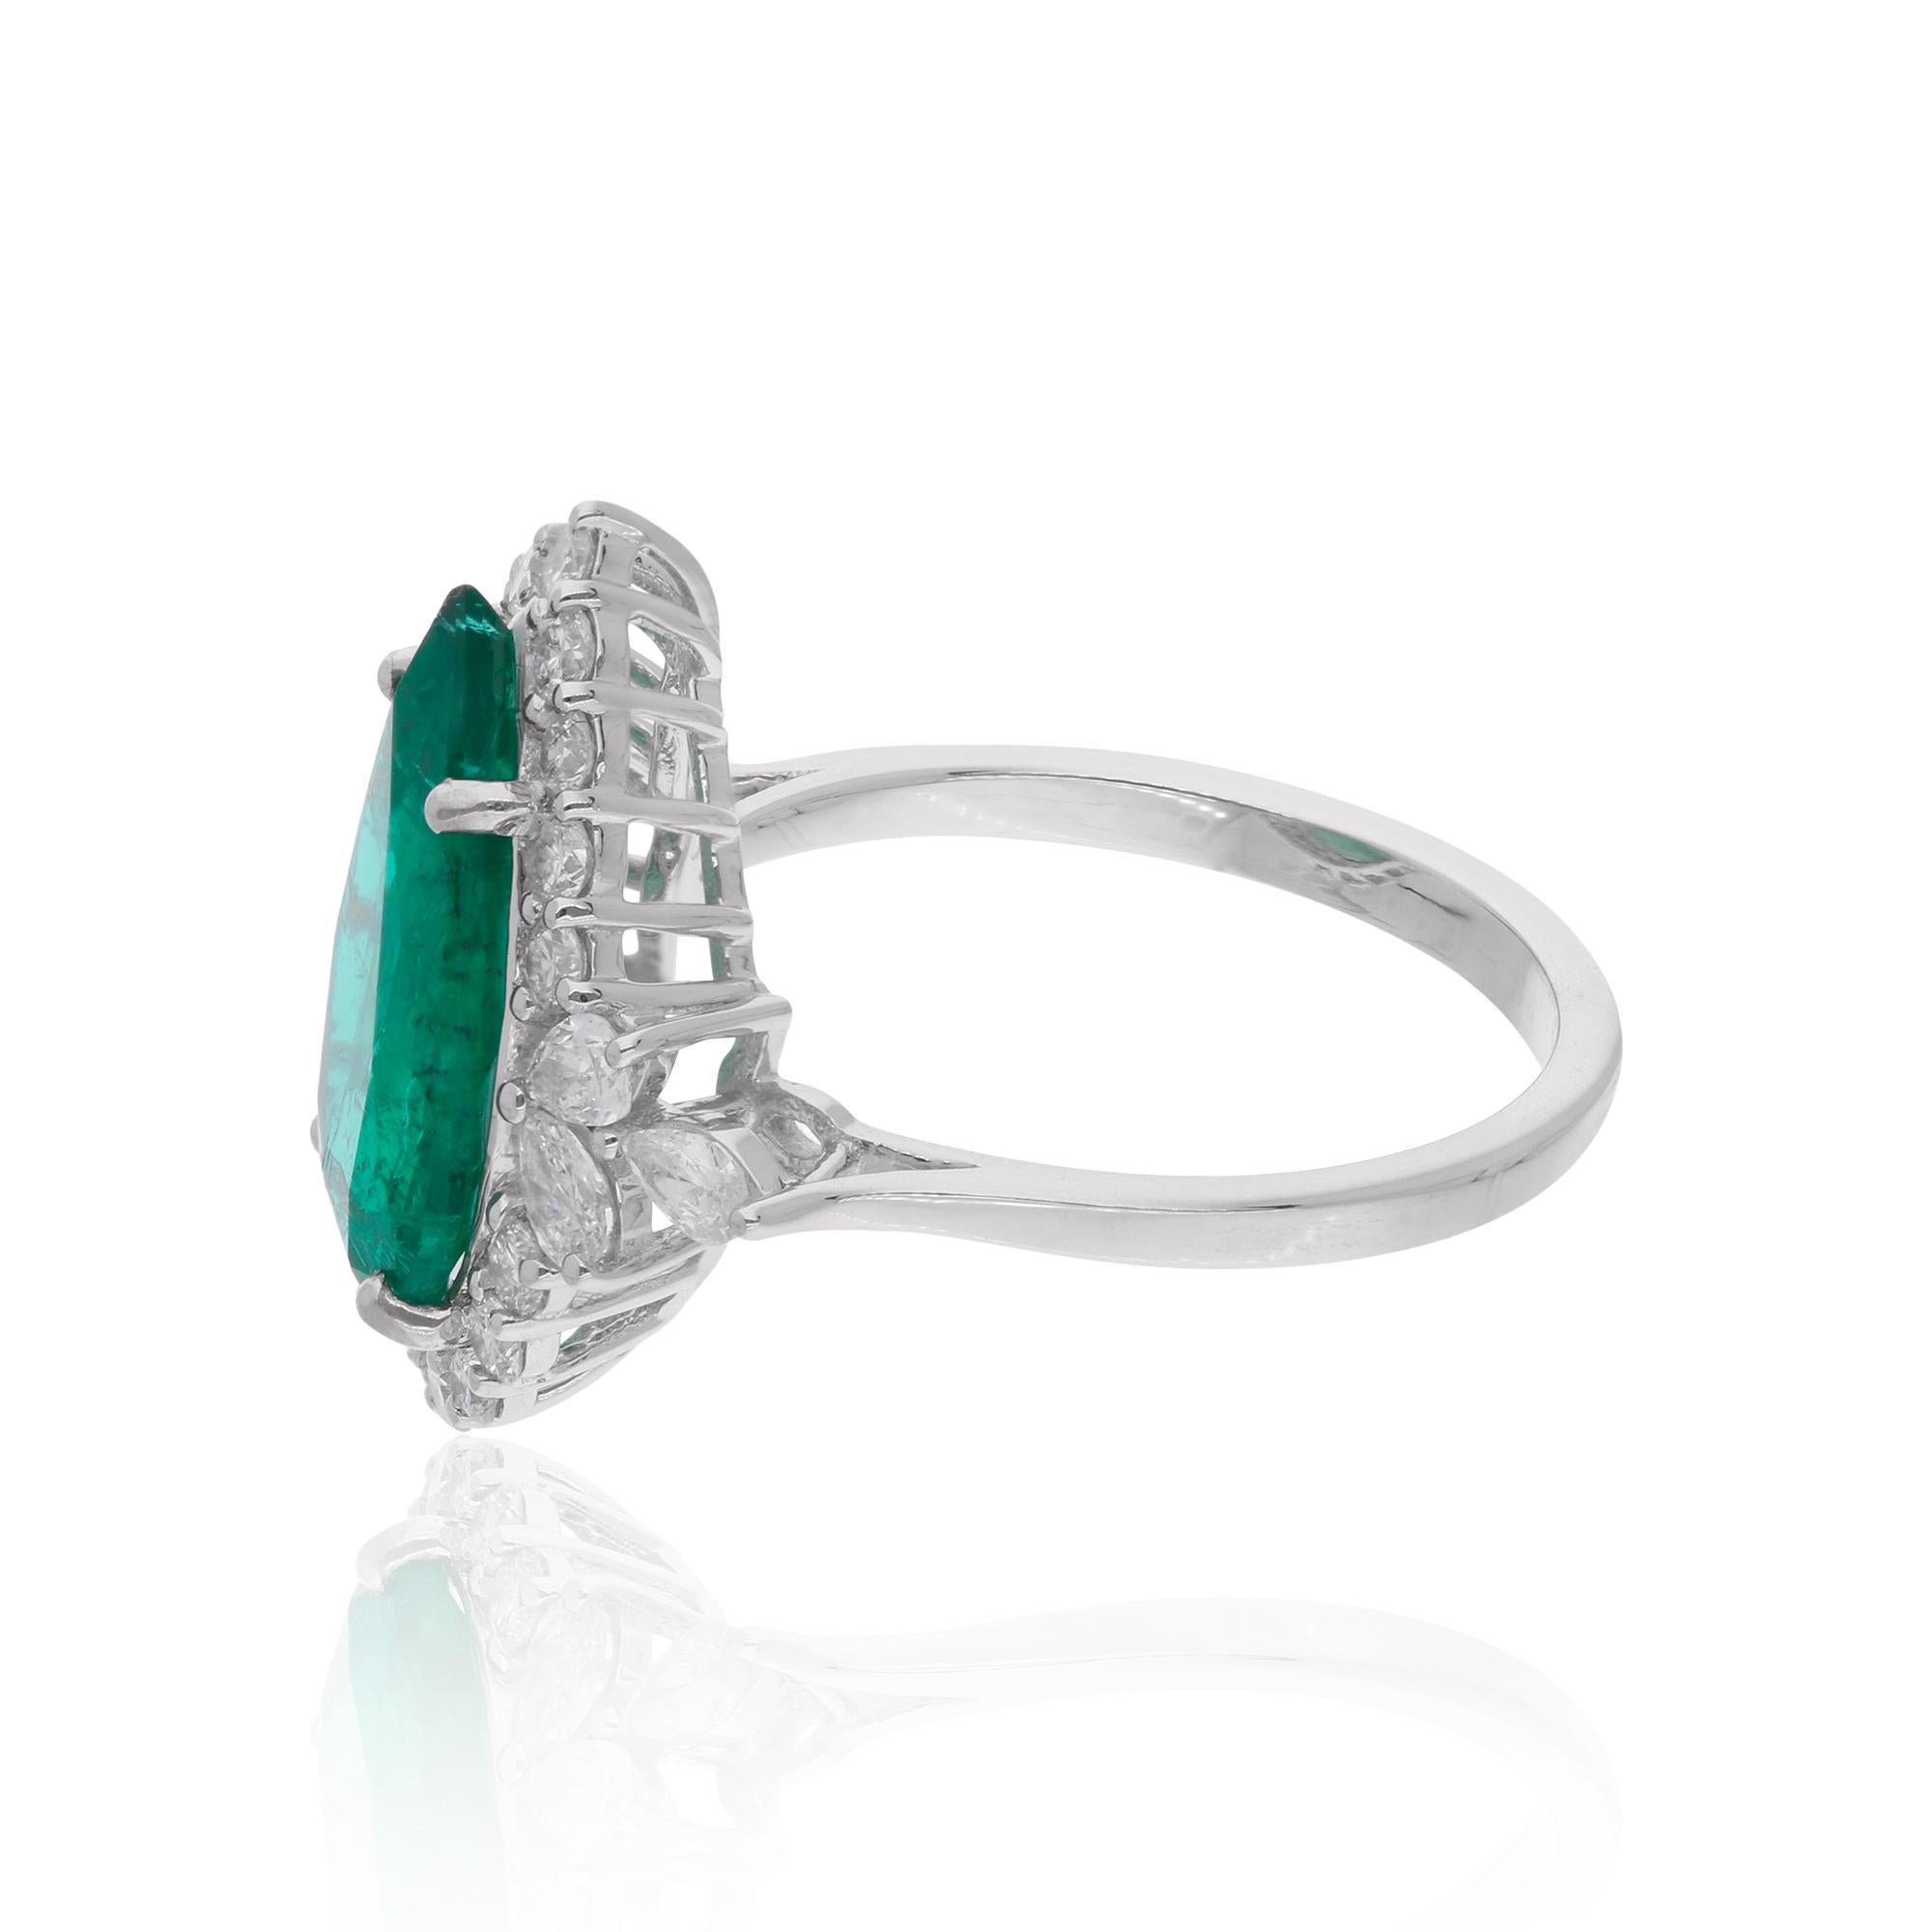 Women's Natural Pear Emerald Gemstone Cocktail Ring Diamond Pave 14 Karat White Gold For Sale